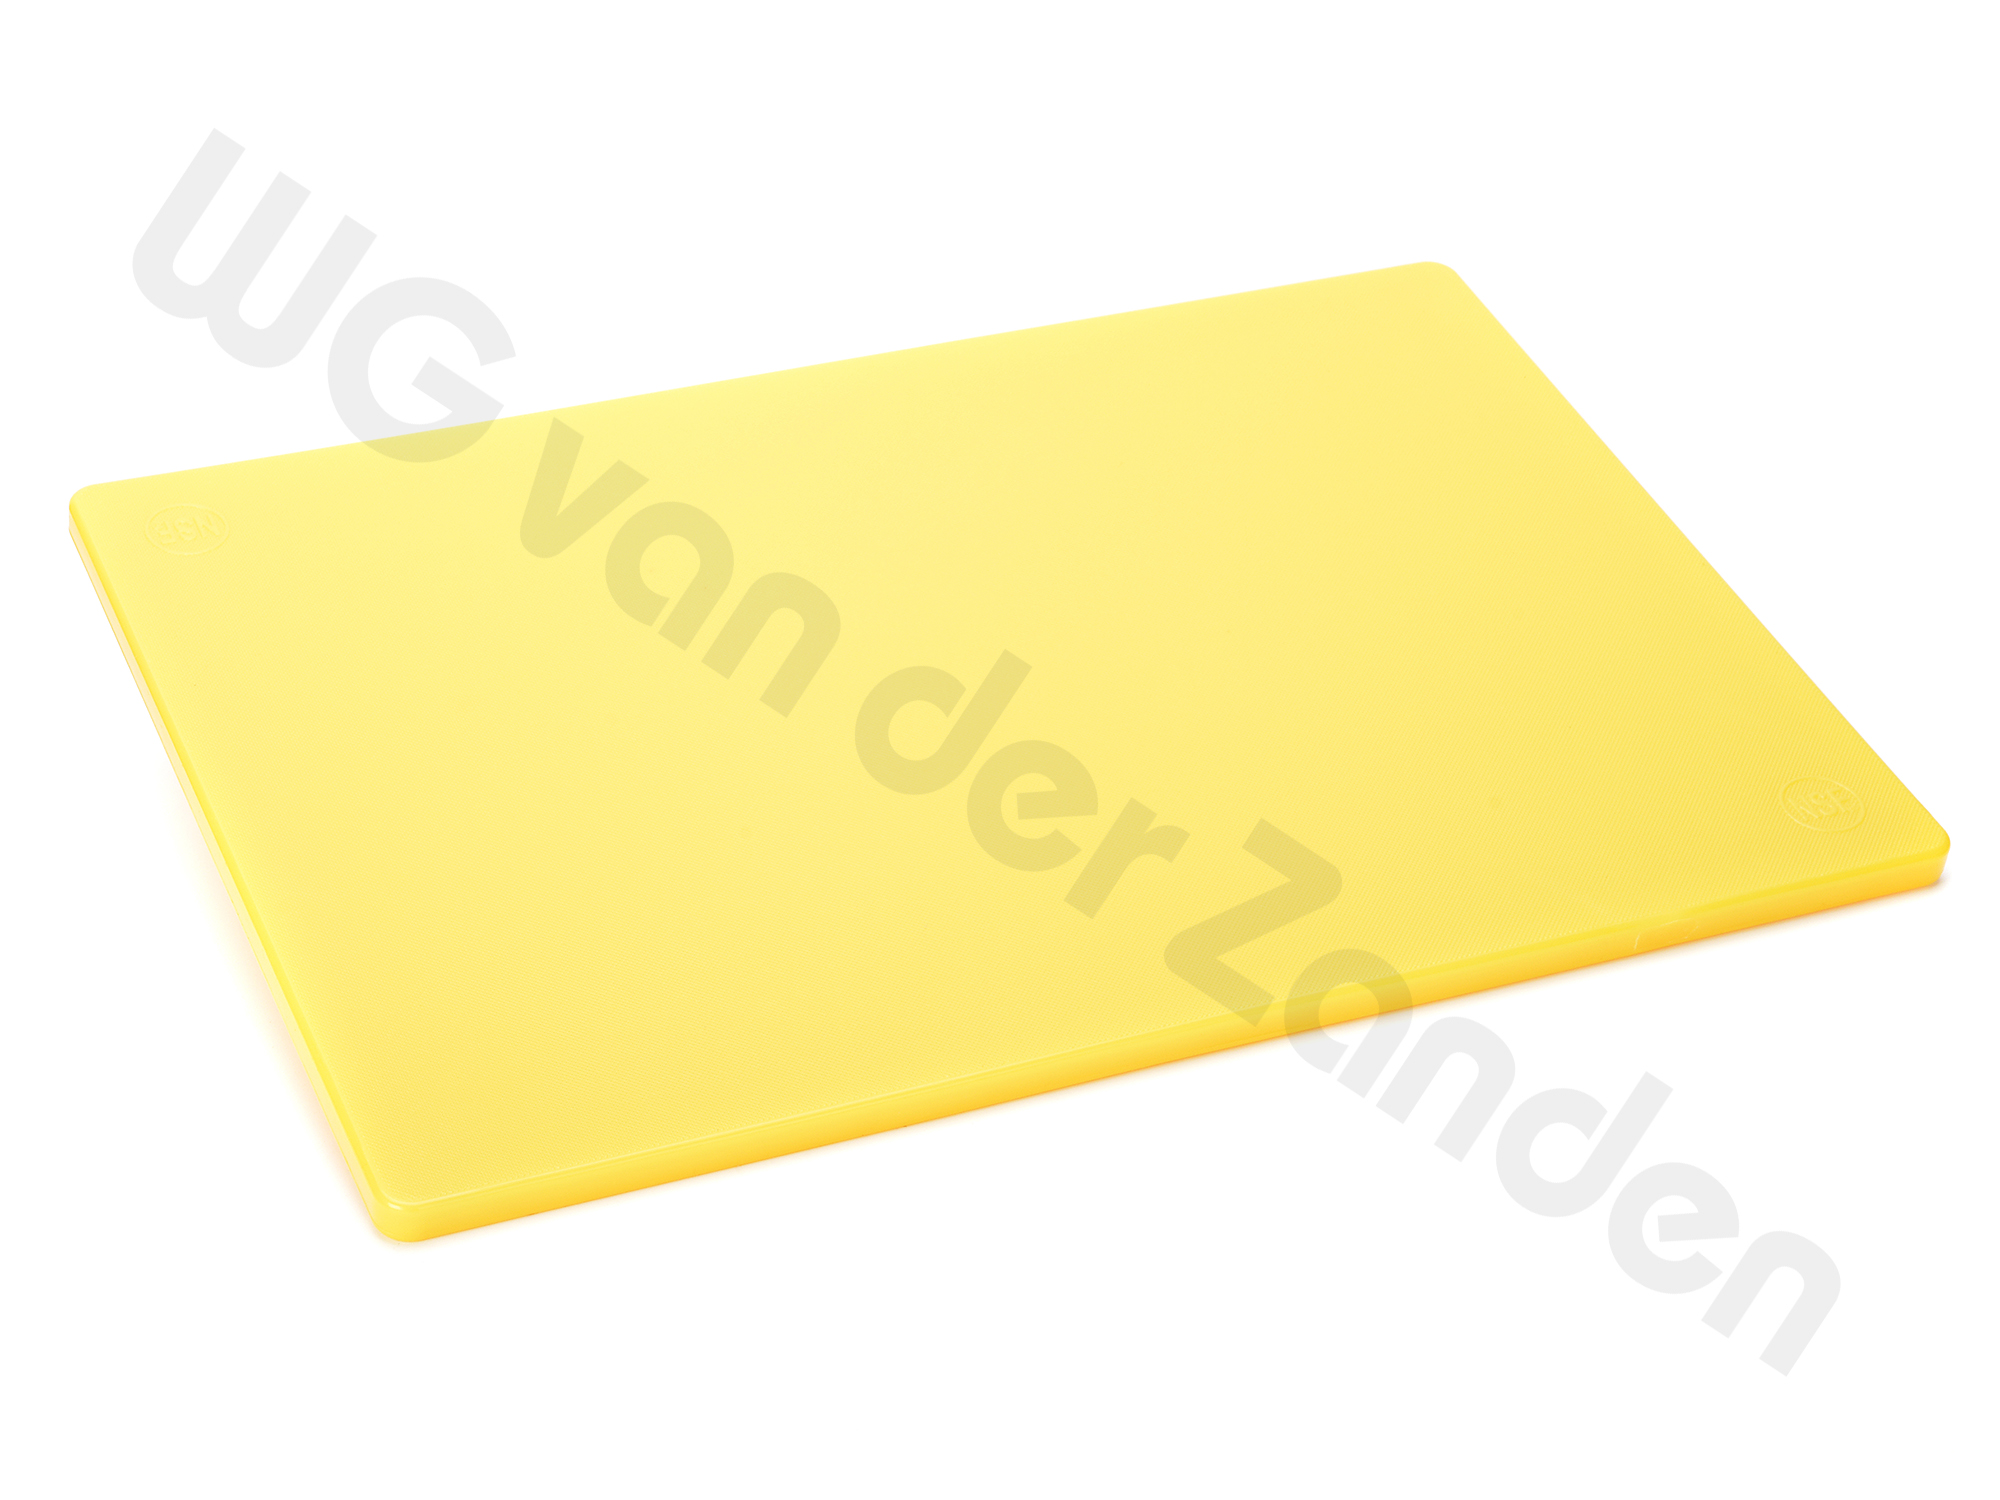 441315 CUTTING BOARD 50X30X1.5CM PLASTIC YELLOW (POULTRY)